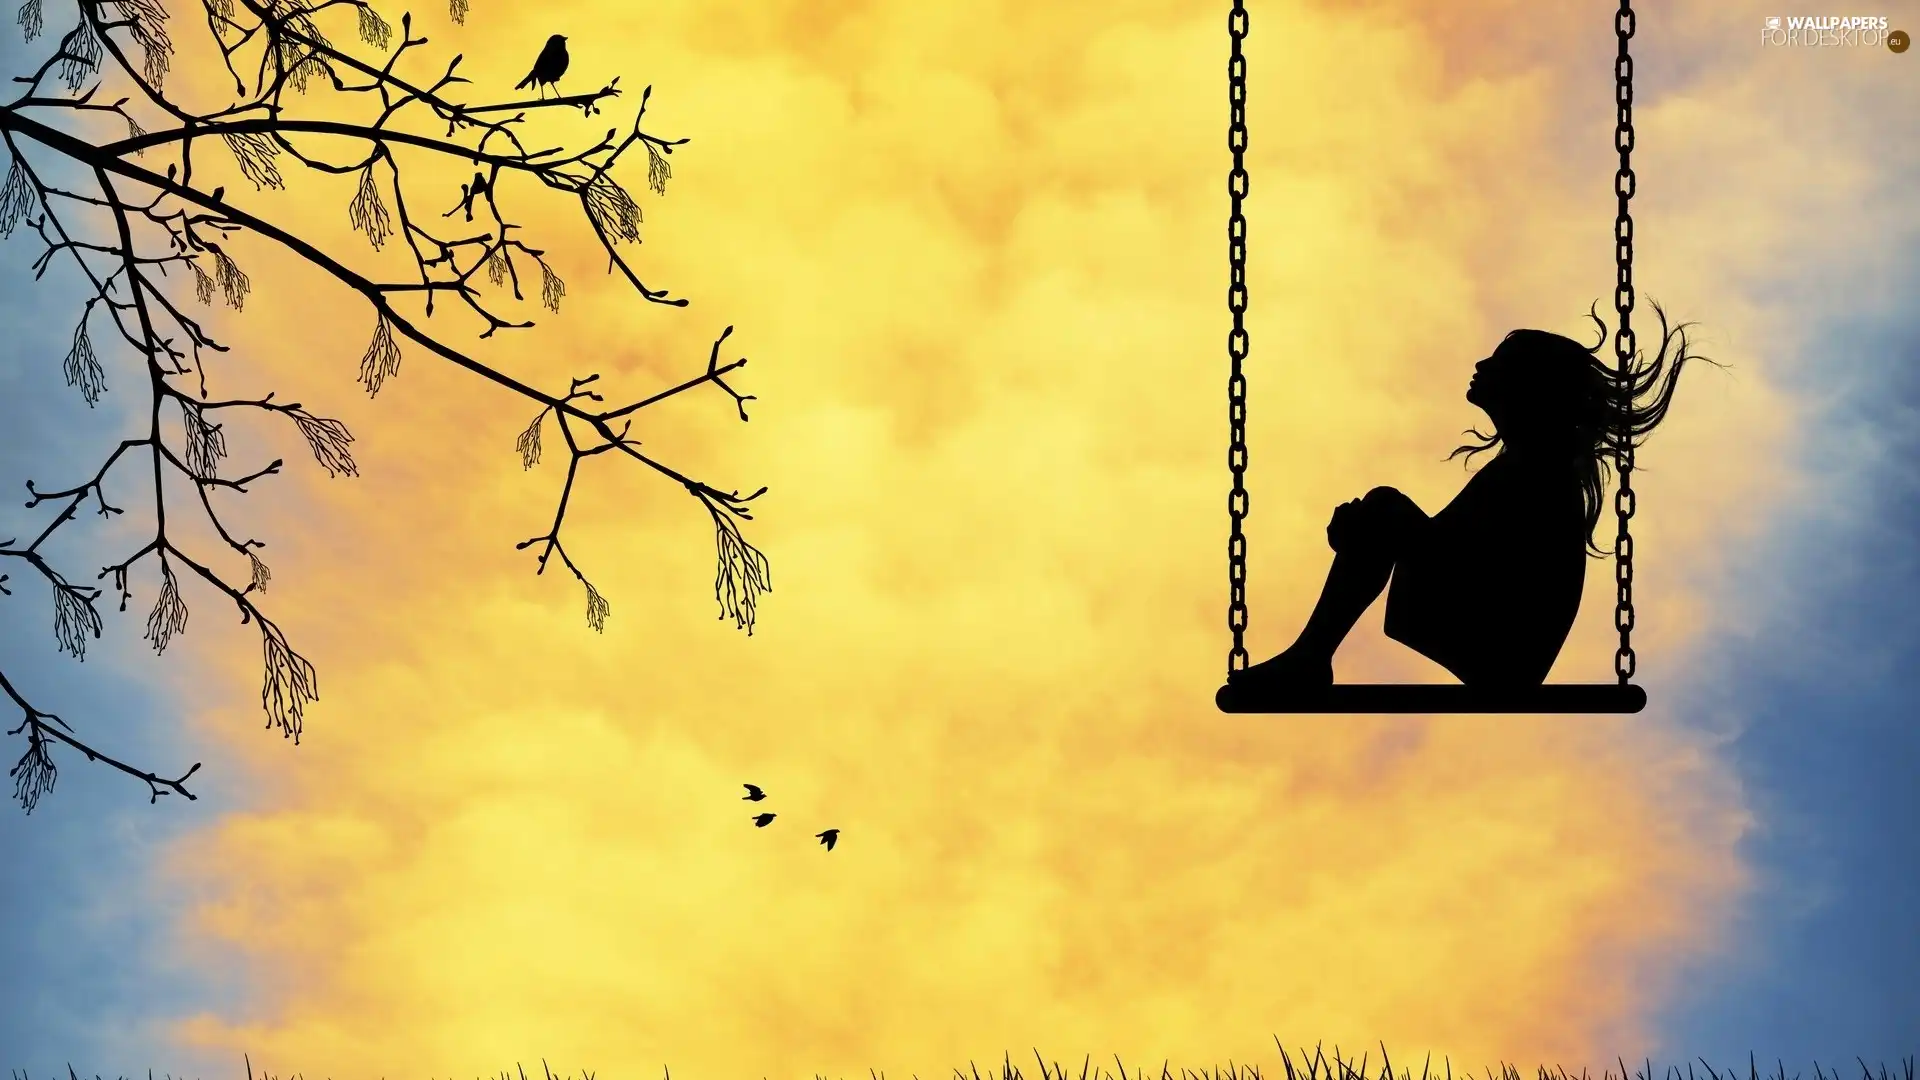 clouds, trees, Swing, girl, graphics